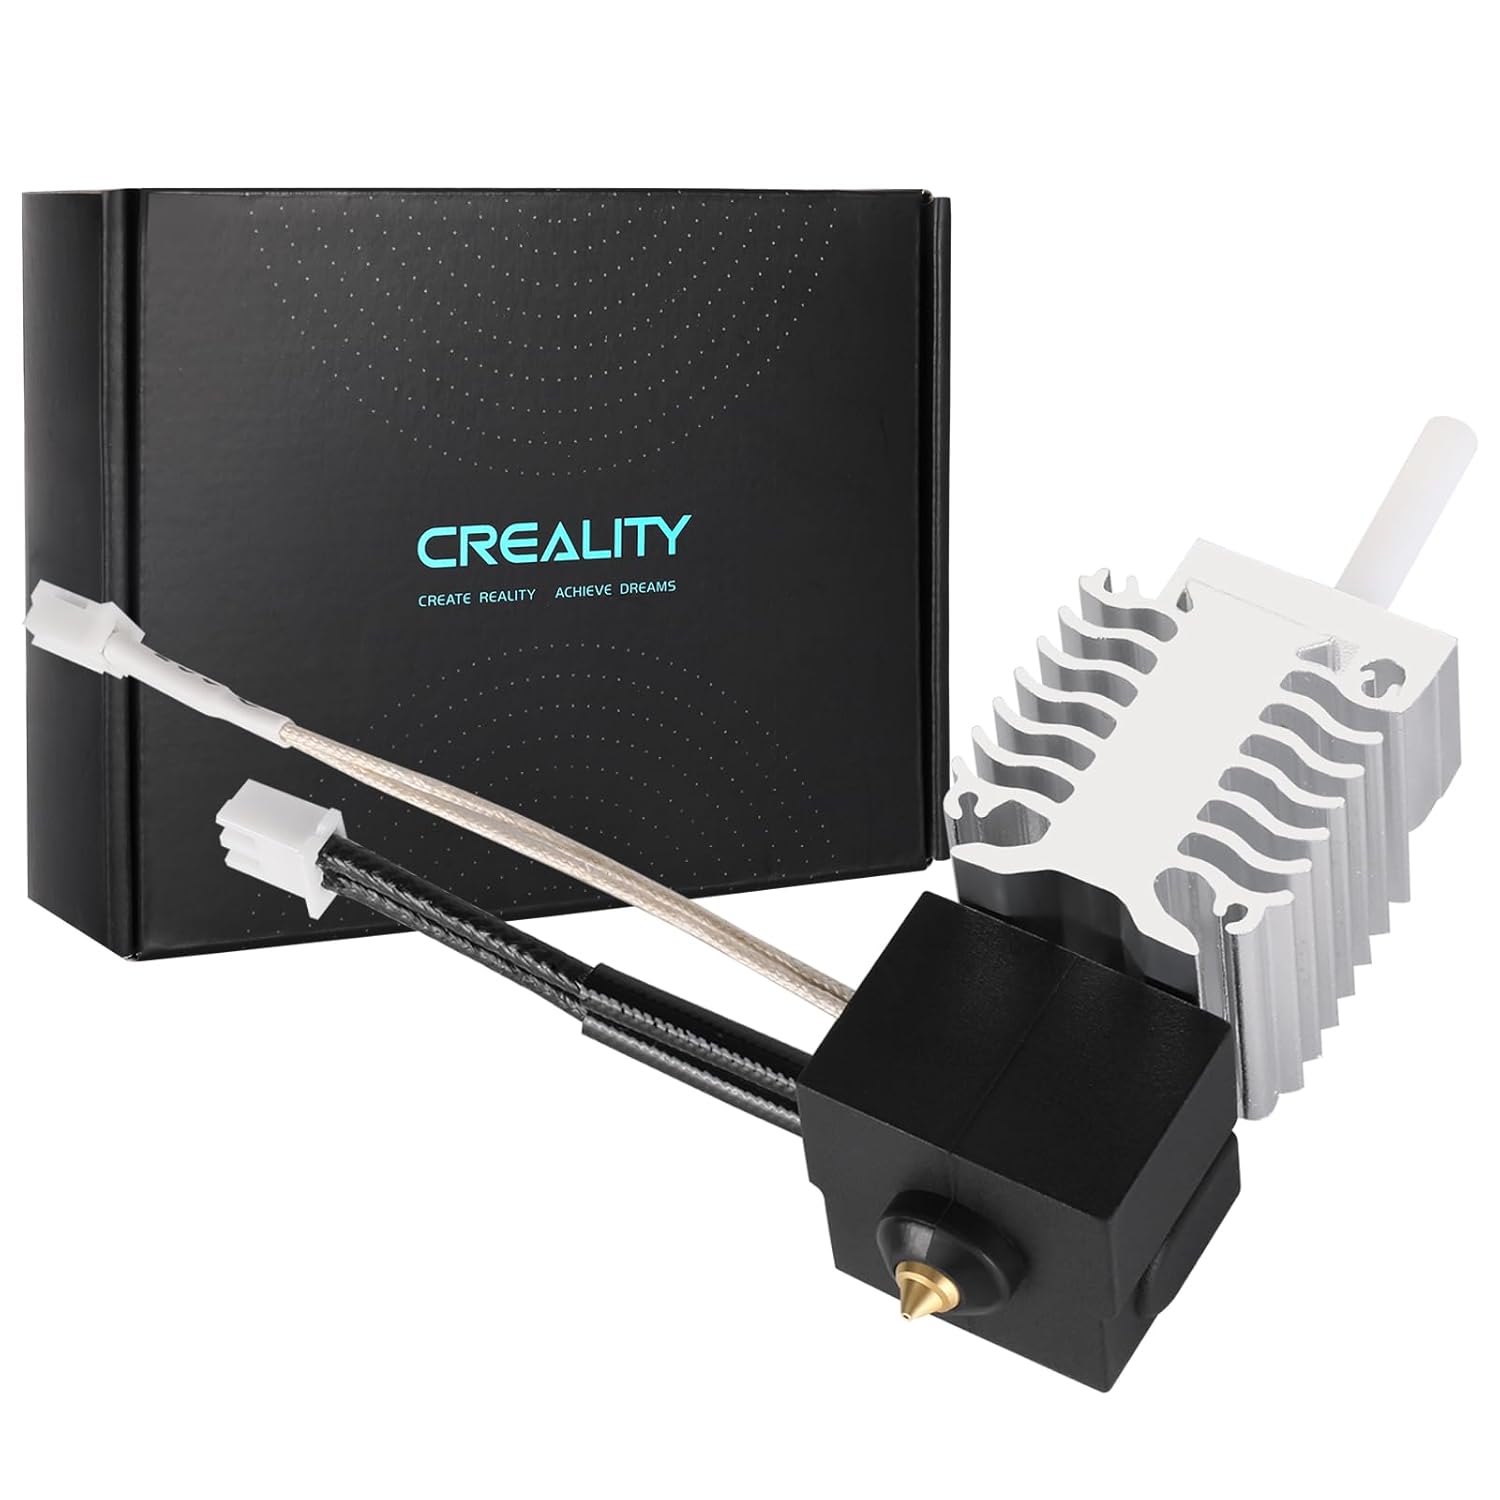 creality-official-ender-3-v3-se-hotend-kit-260-high-temperature-resistance-hotend-heater-block-250mms-high-speed-assembl Creality Official Ender 3 V3 SE Hotend Kit Review